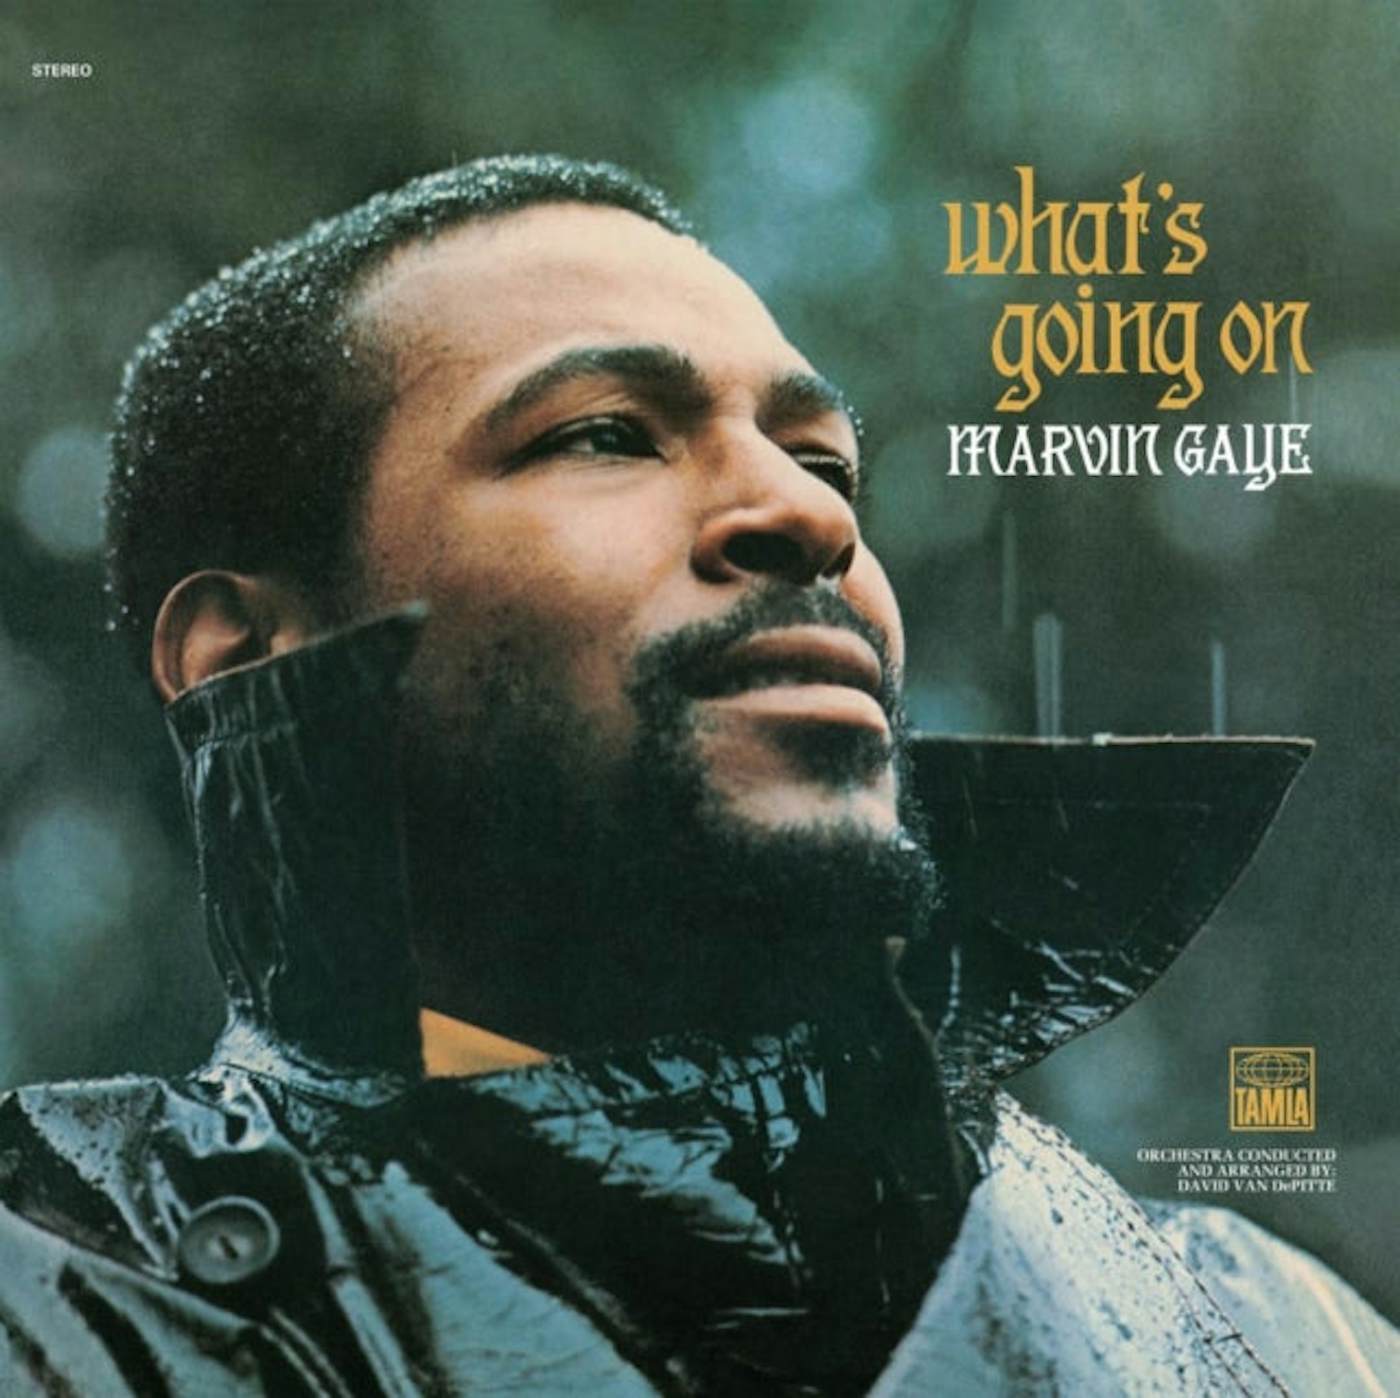 Marvin Gaye WHAT'S GOING ON (50TH ANNIVERSARY) Vinyl Record